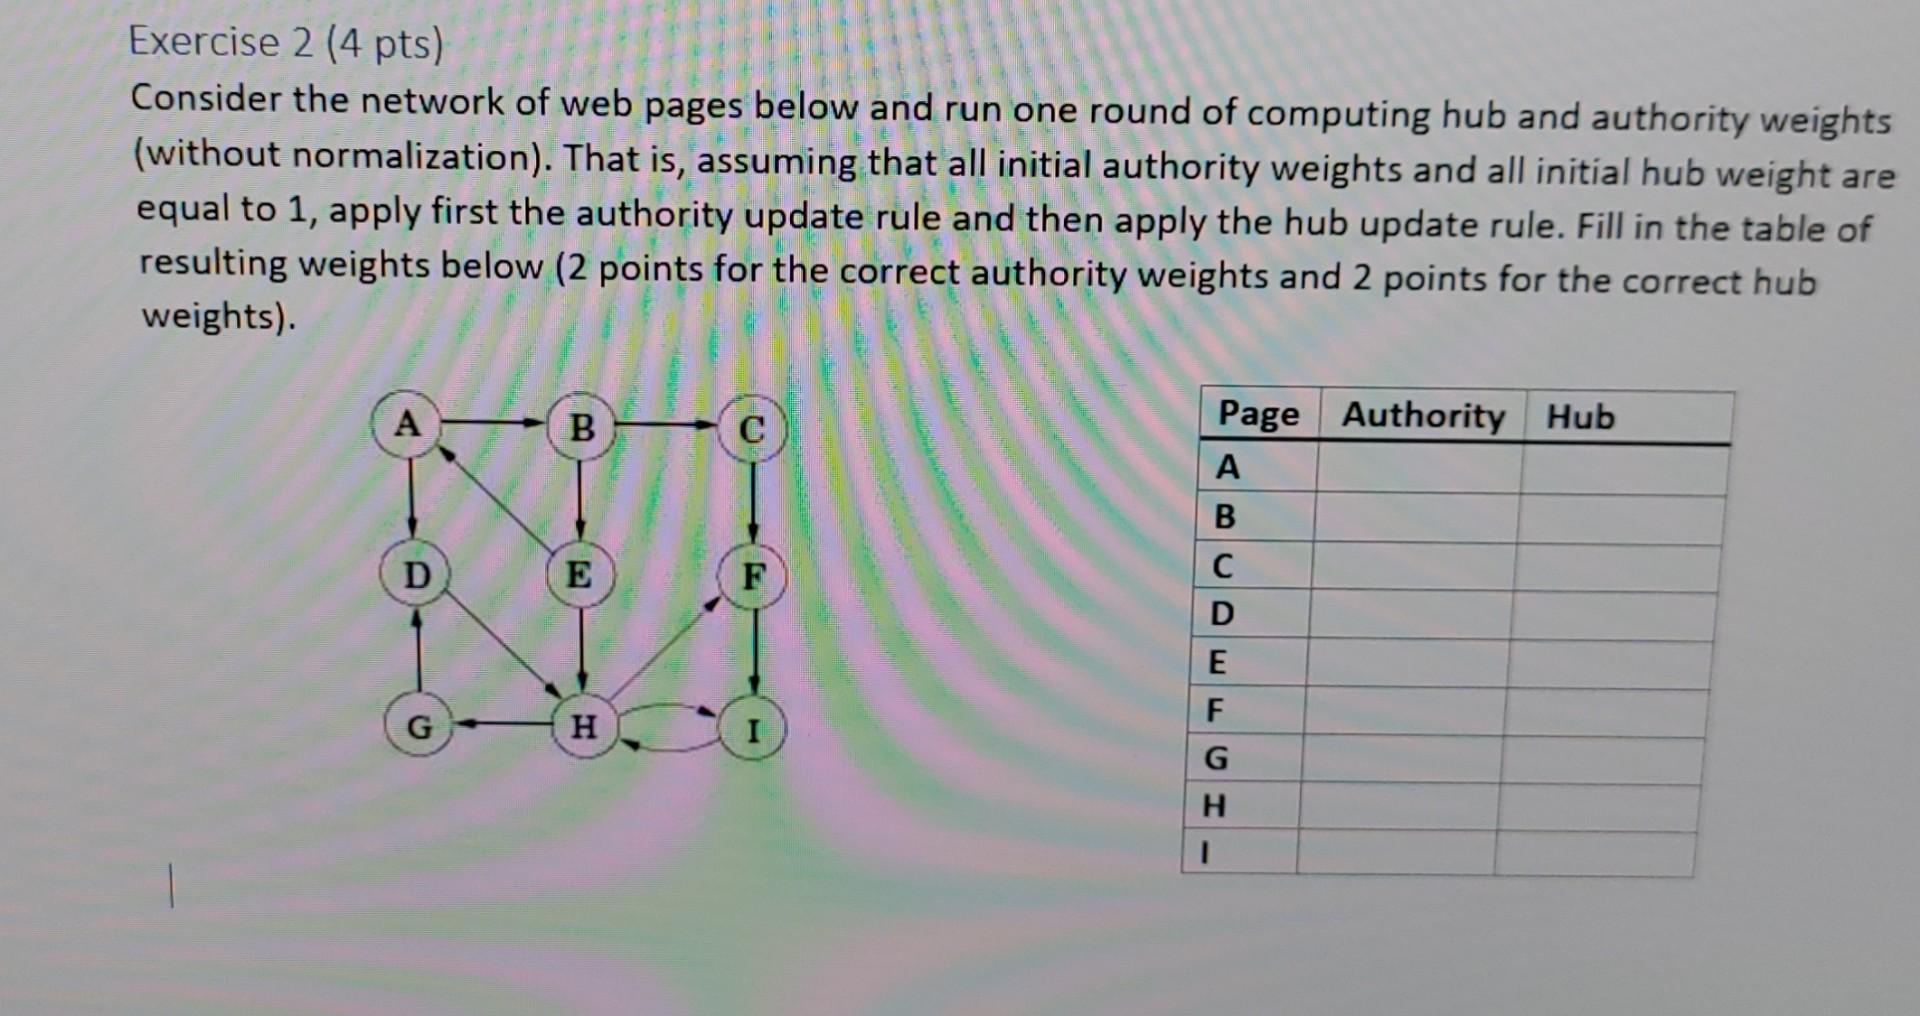 Exercise 2 (4 pts) Consider the network of web pages below and run one round of computing hub and authority